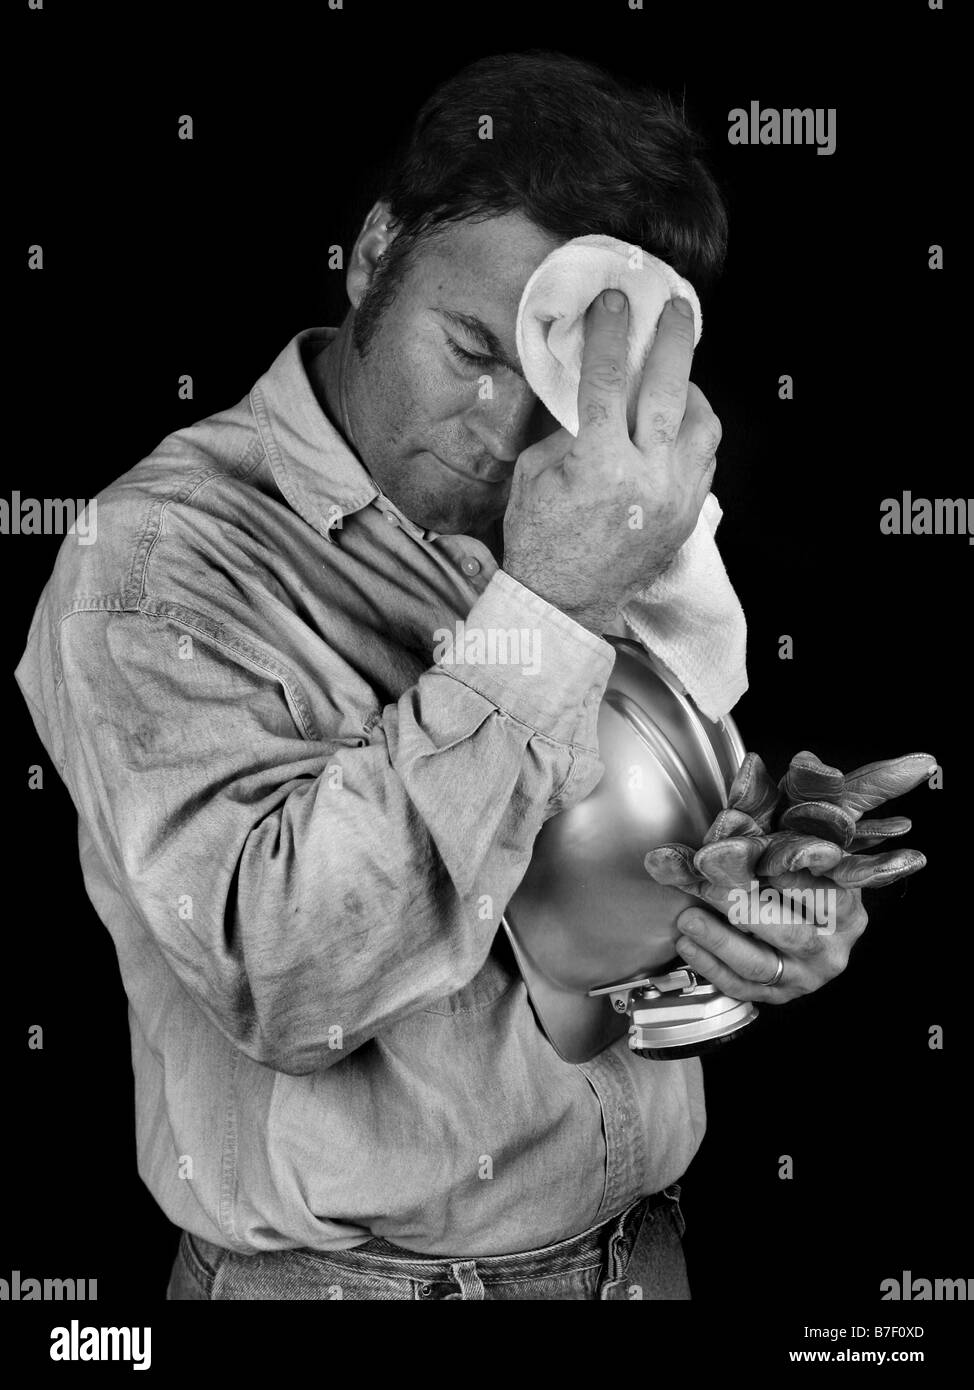 A tired coal miner wiping coal dust from his brow after a long day of work Black White Stock Photo